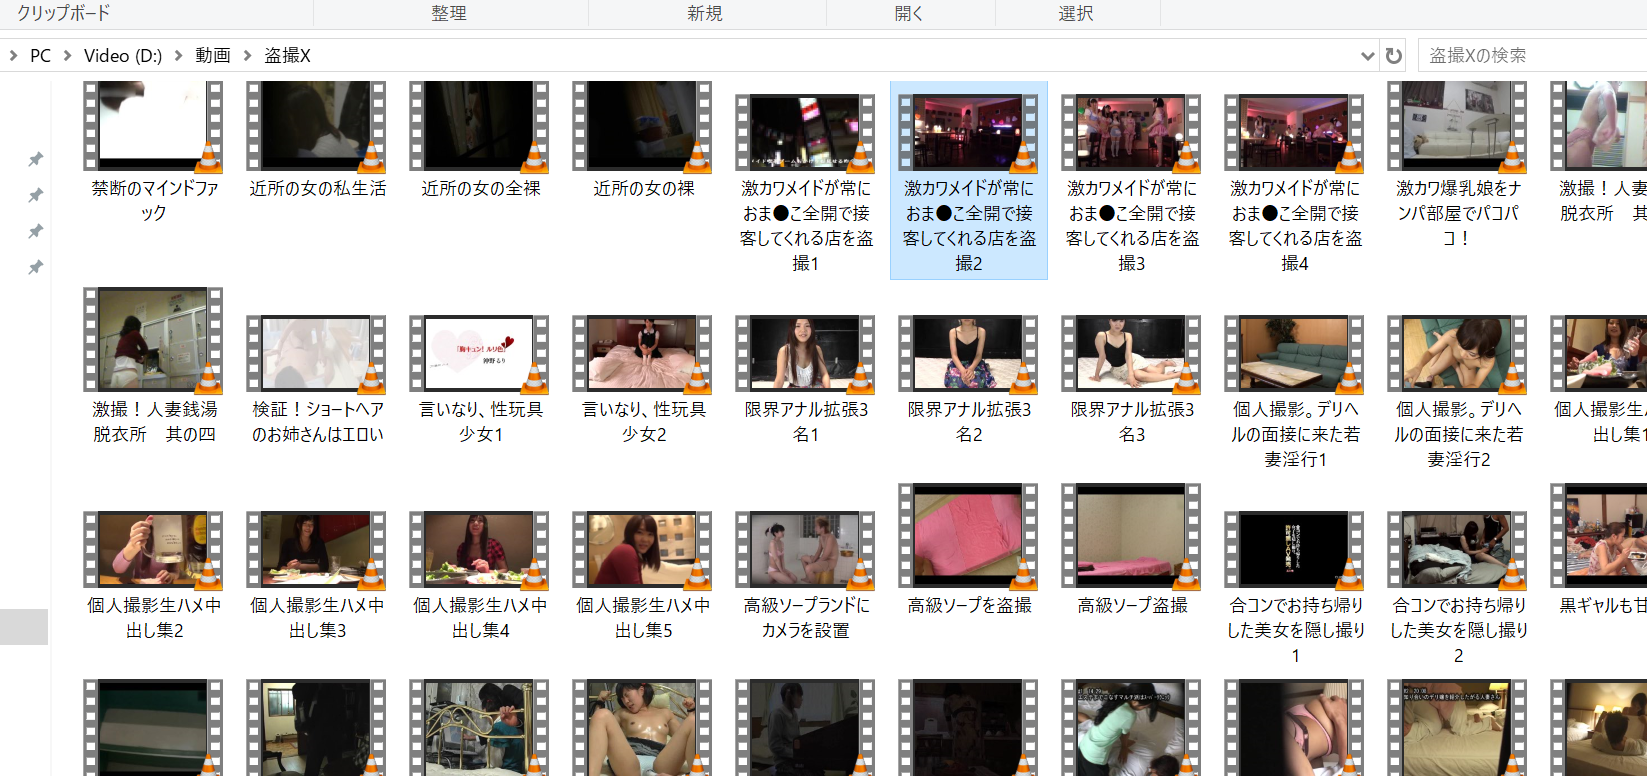 some of the uncensored JAV SEX videos I downloaded from Voyeur X